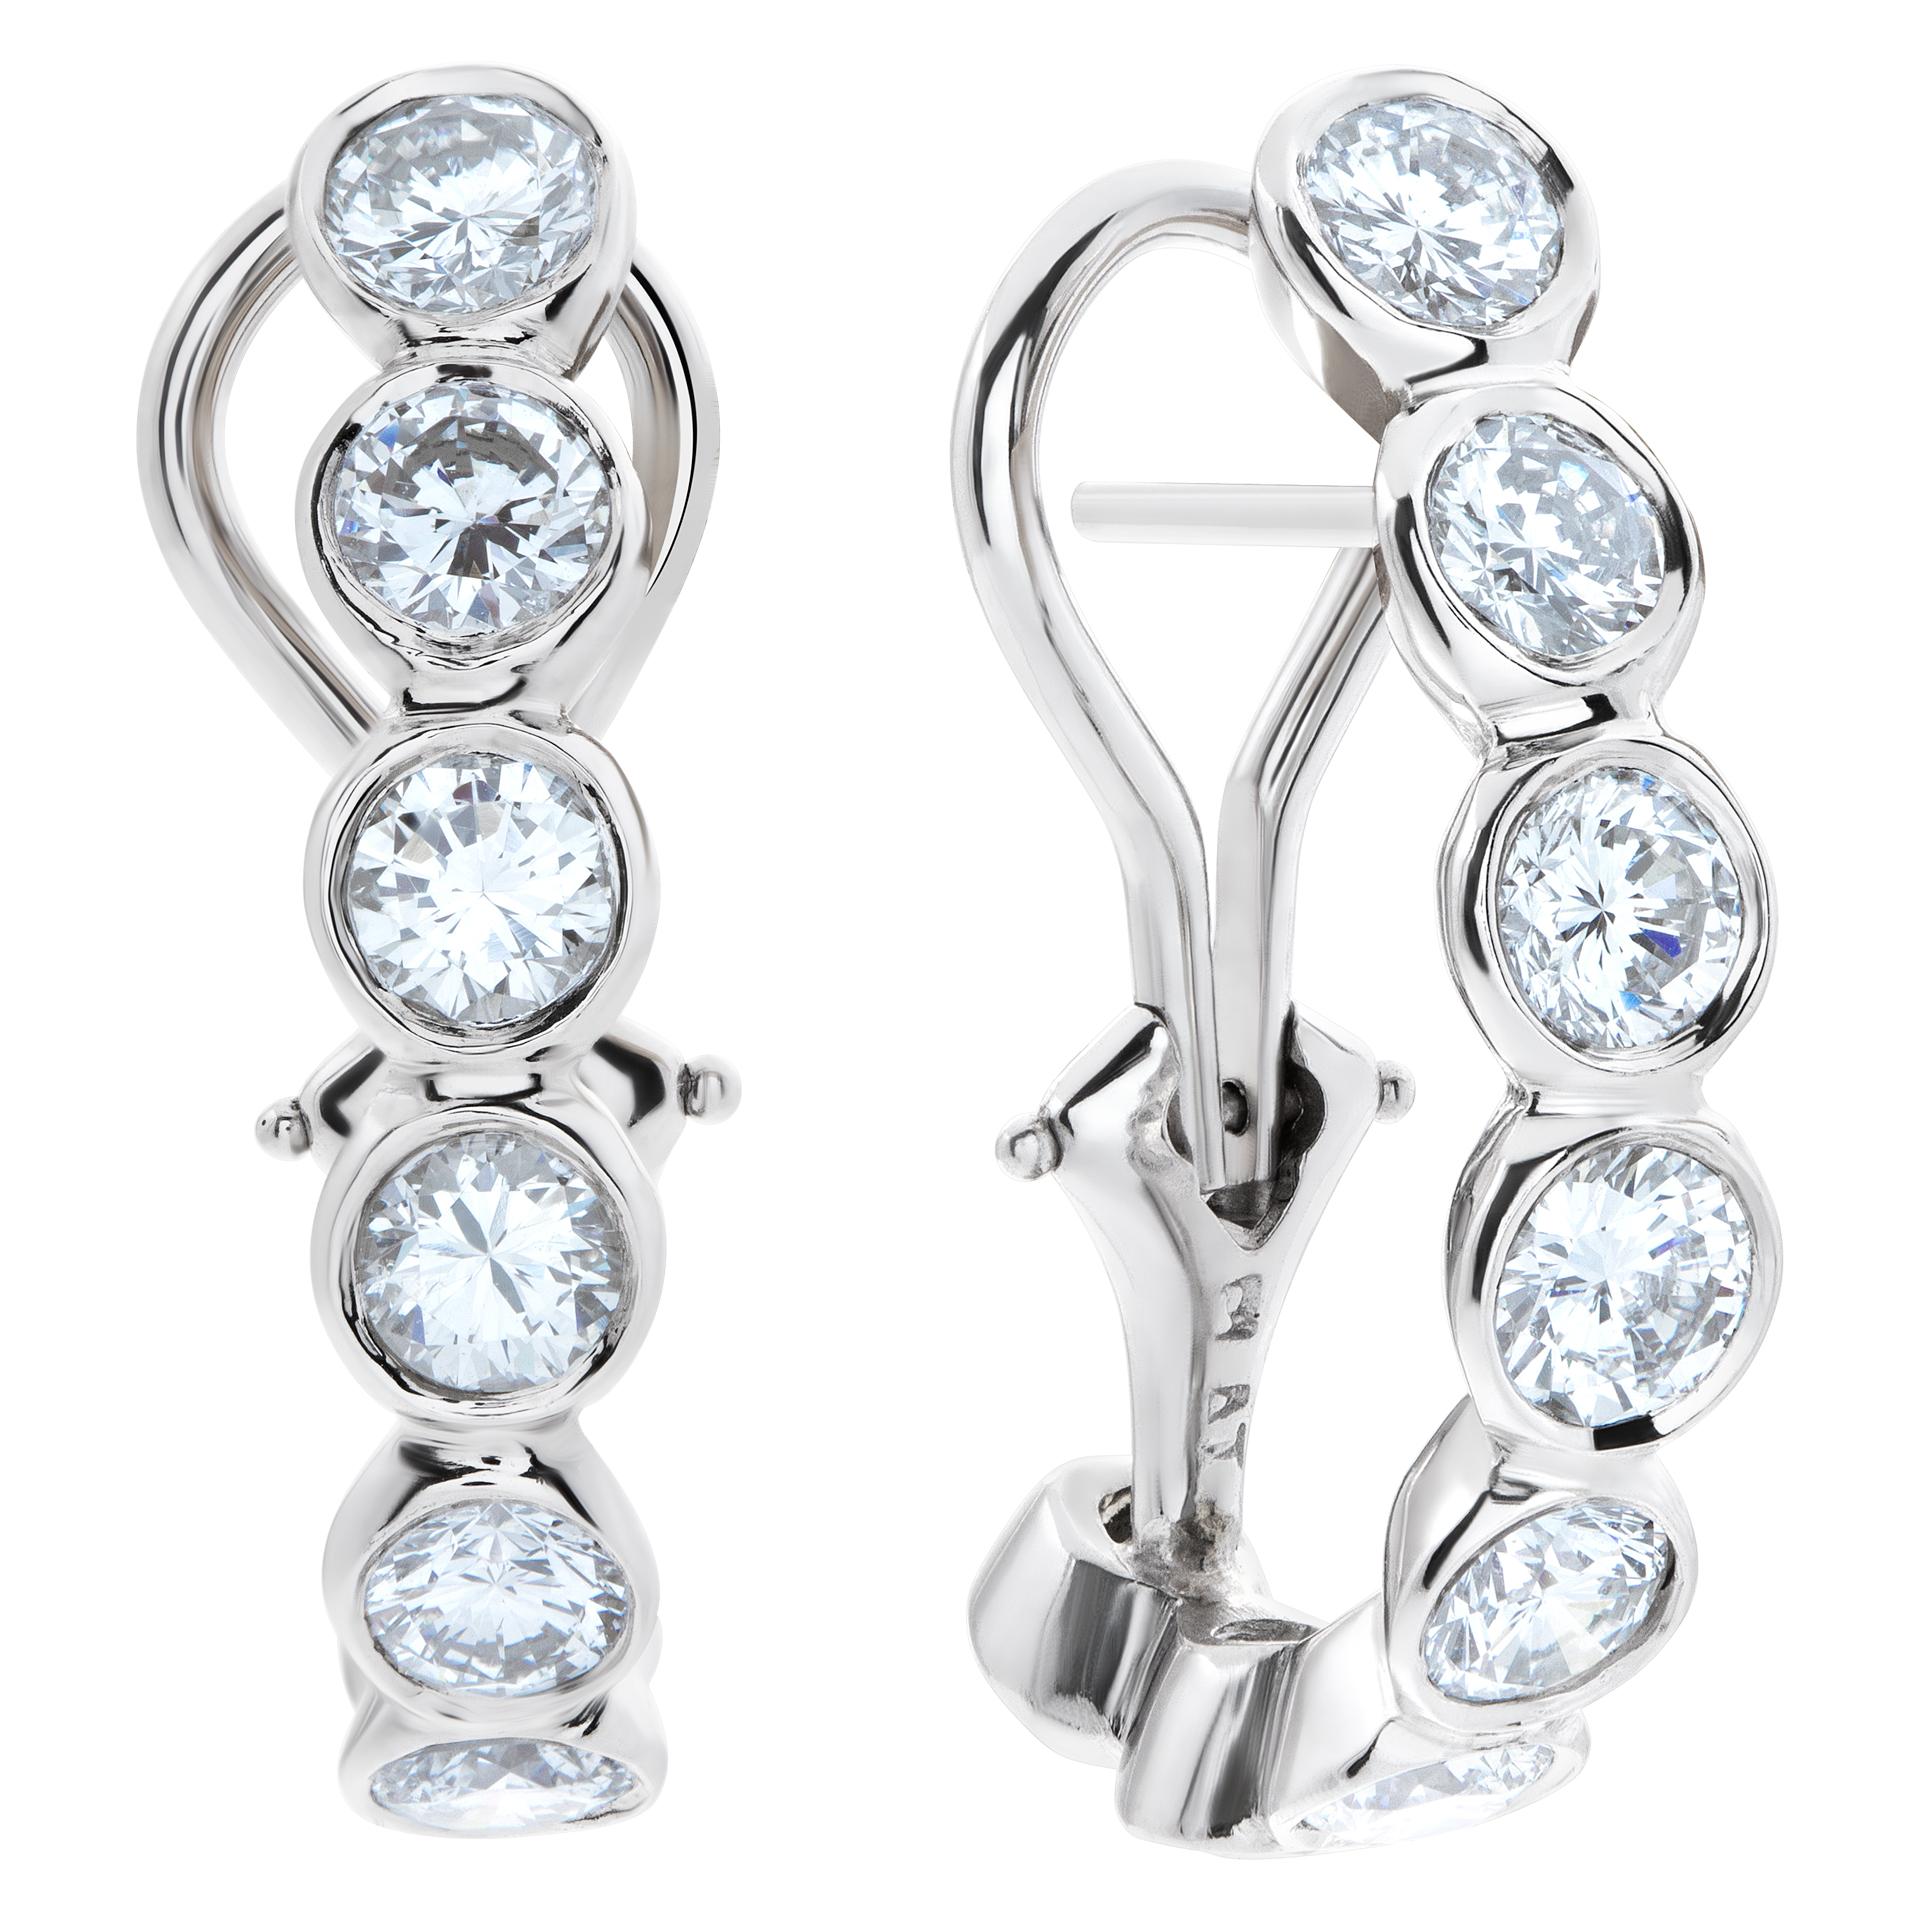 Platinum semi-hoop earrings with 3.75 carats in round G-H color, VS-SI clarity diamonds. Drop length 1'', width 5mm.